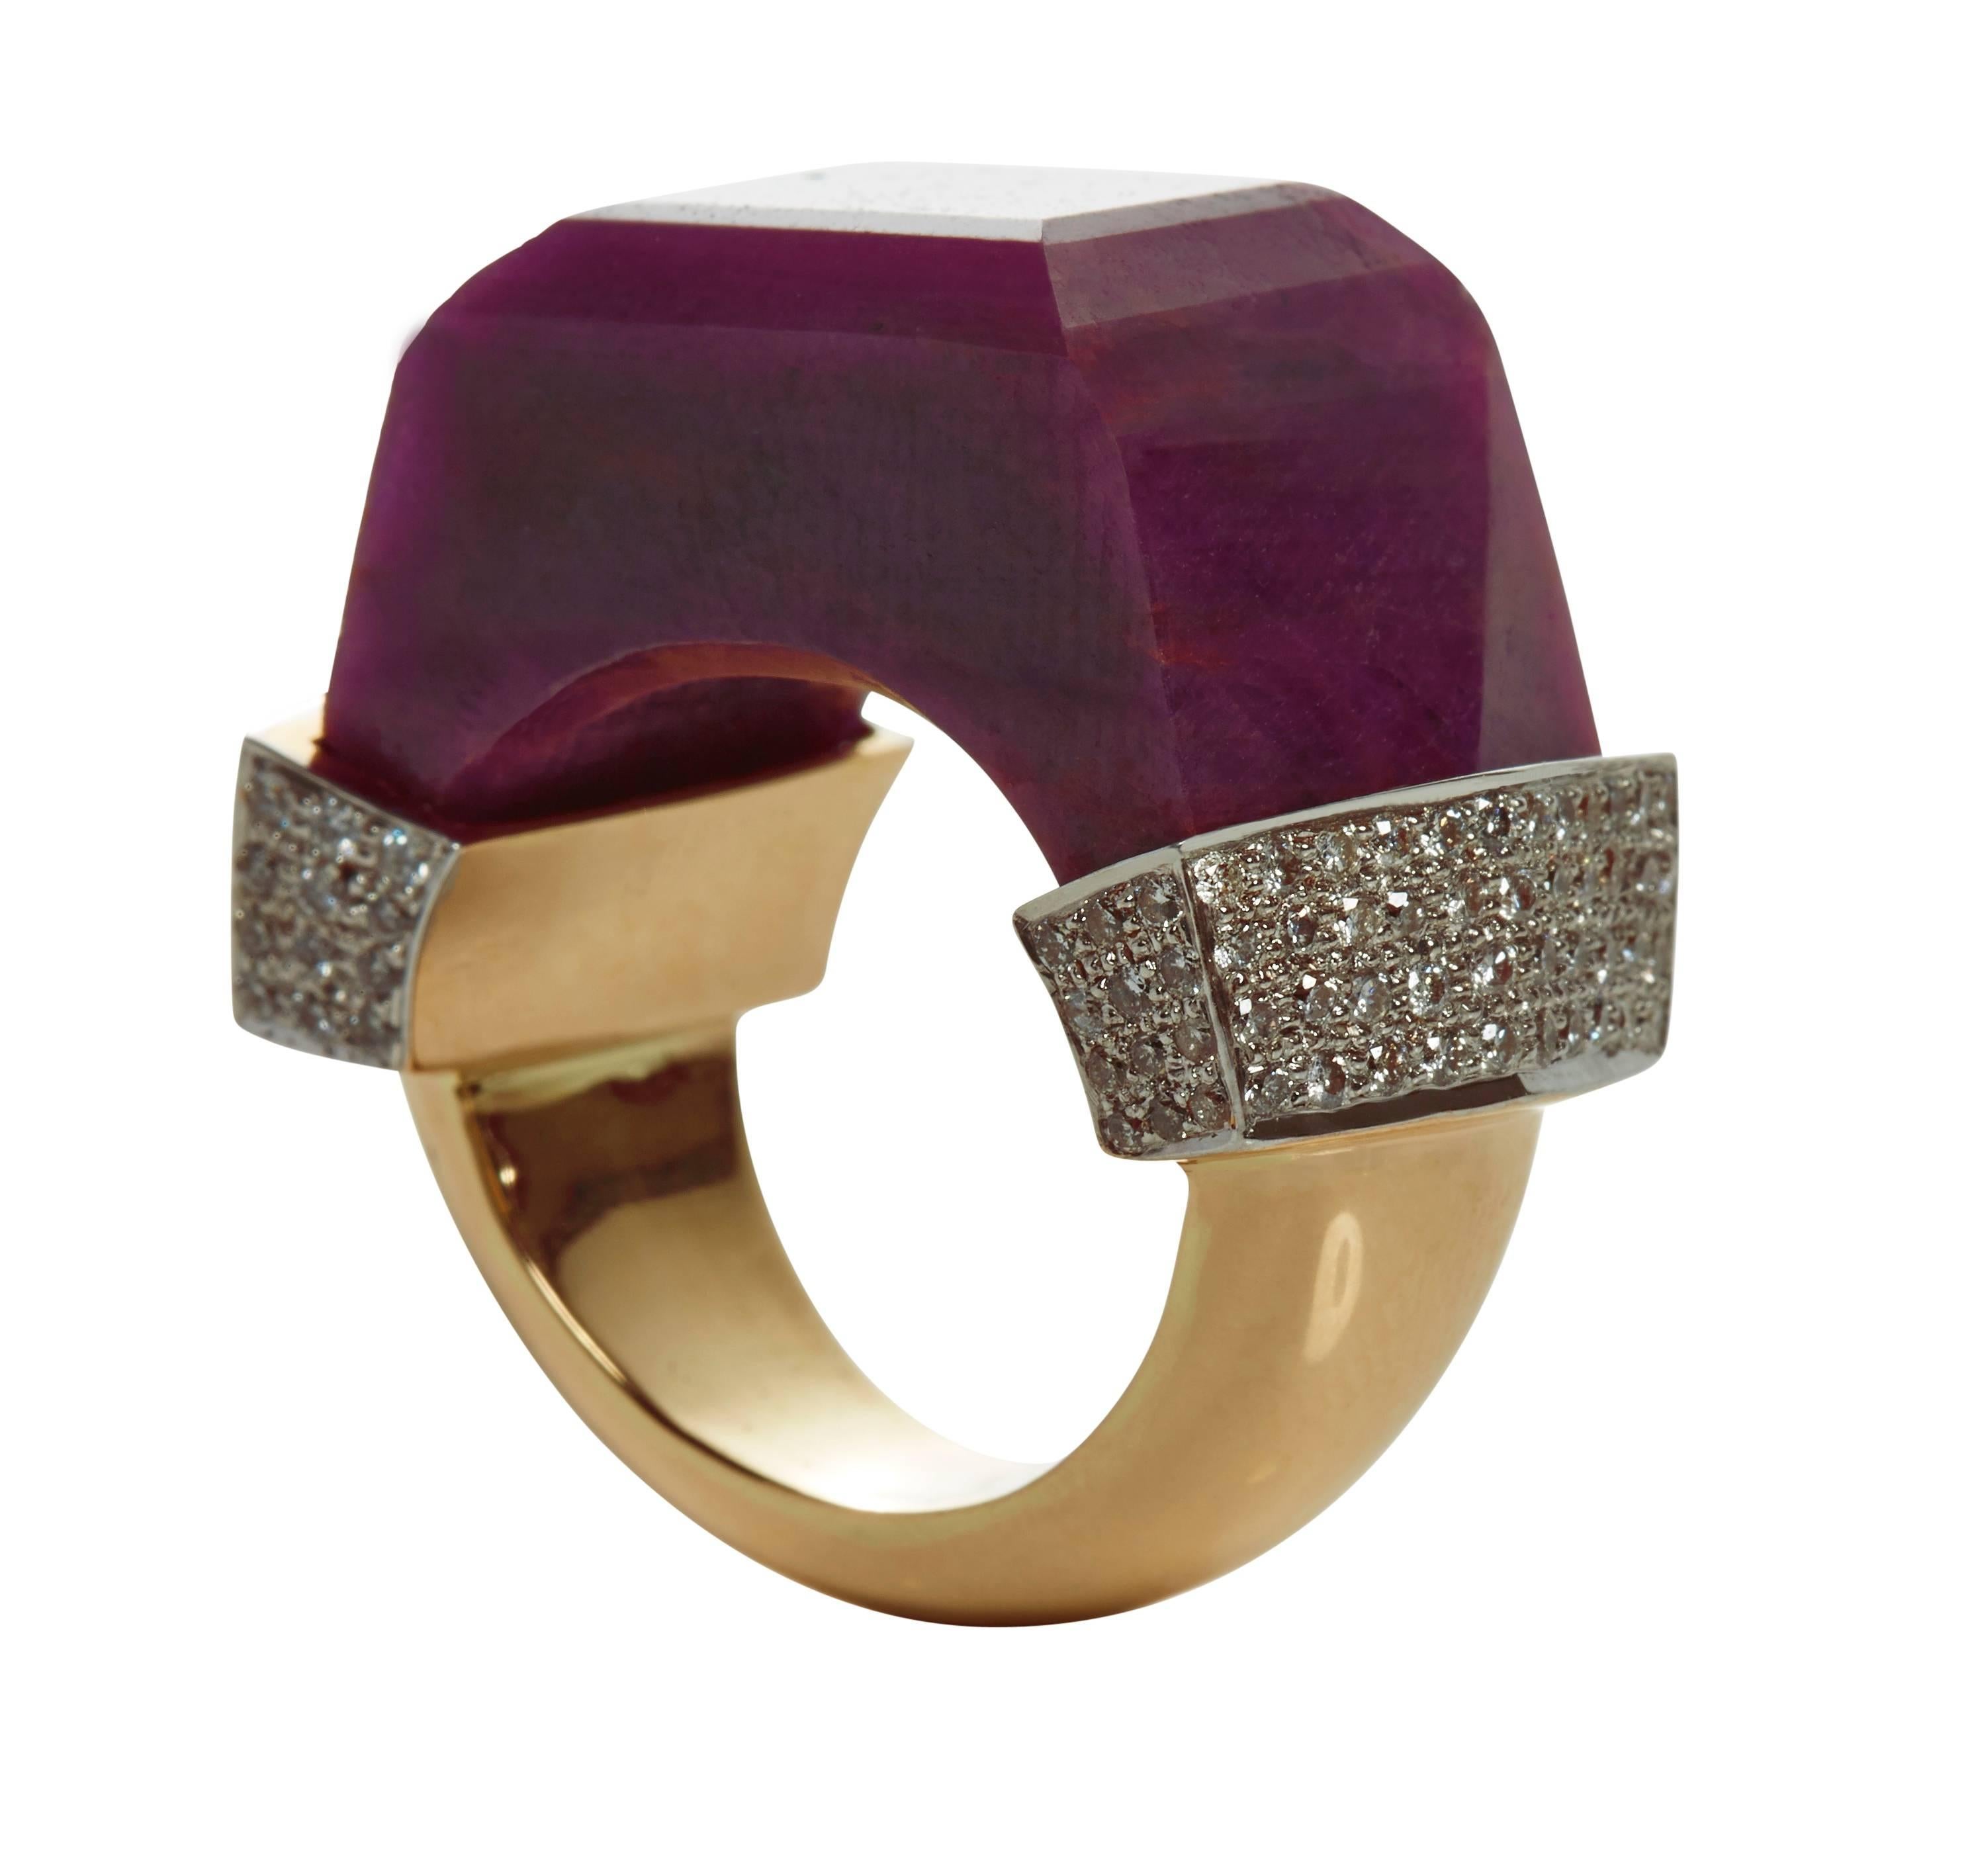 Jade Jagger NeverEnding Ruby Quartz and Diamond Pave Ring featuring 18k gold.
Size available in M/N (US 6.5).
From the NeverEnding Ruby Collection.
Handmade in Jaipur, India.
67.34 ct. Ruby
.45 ctw. Diamond